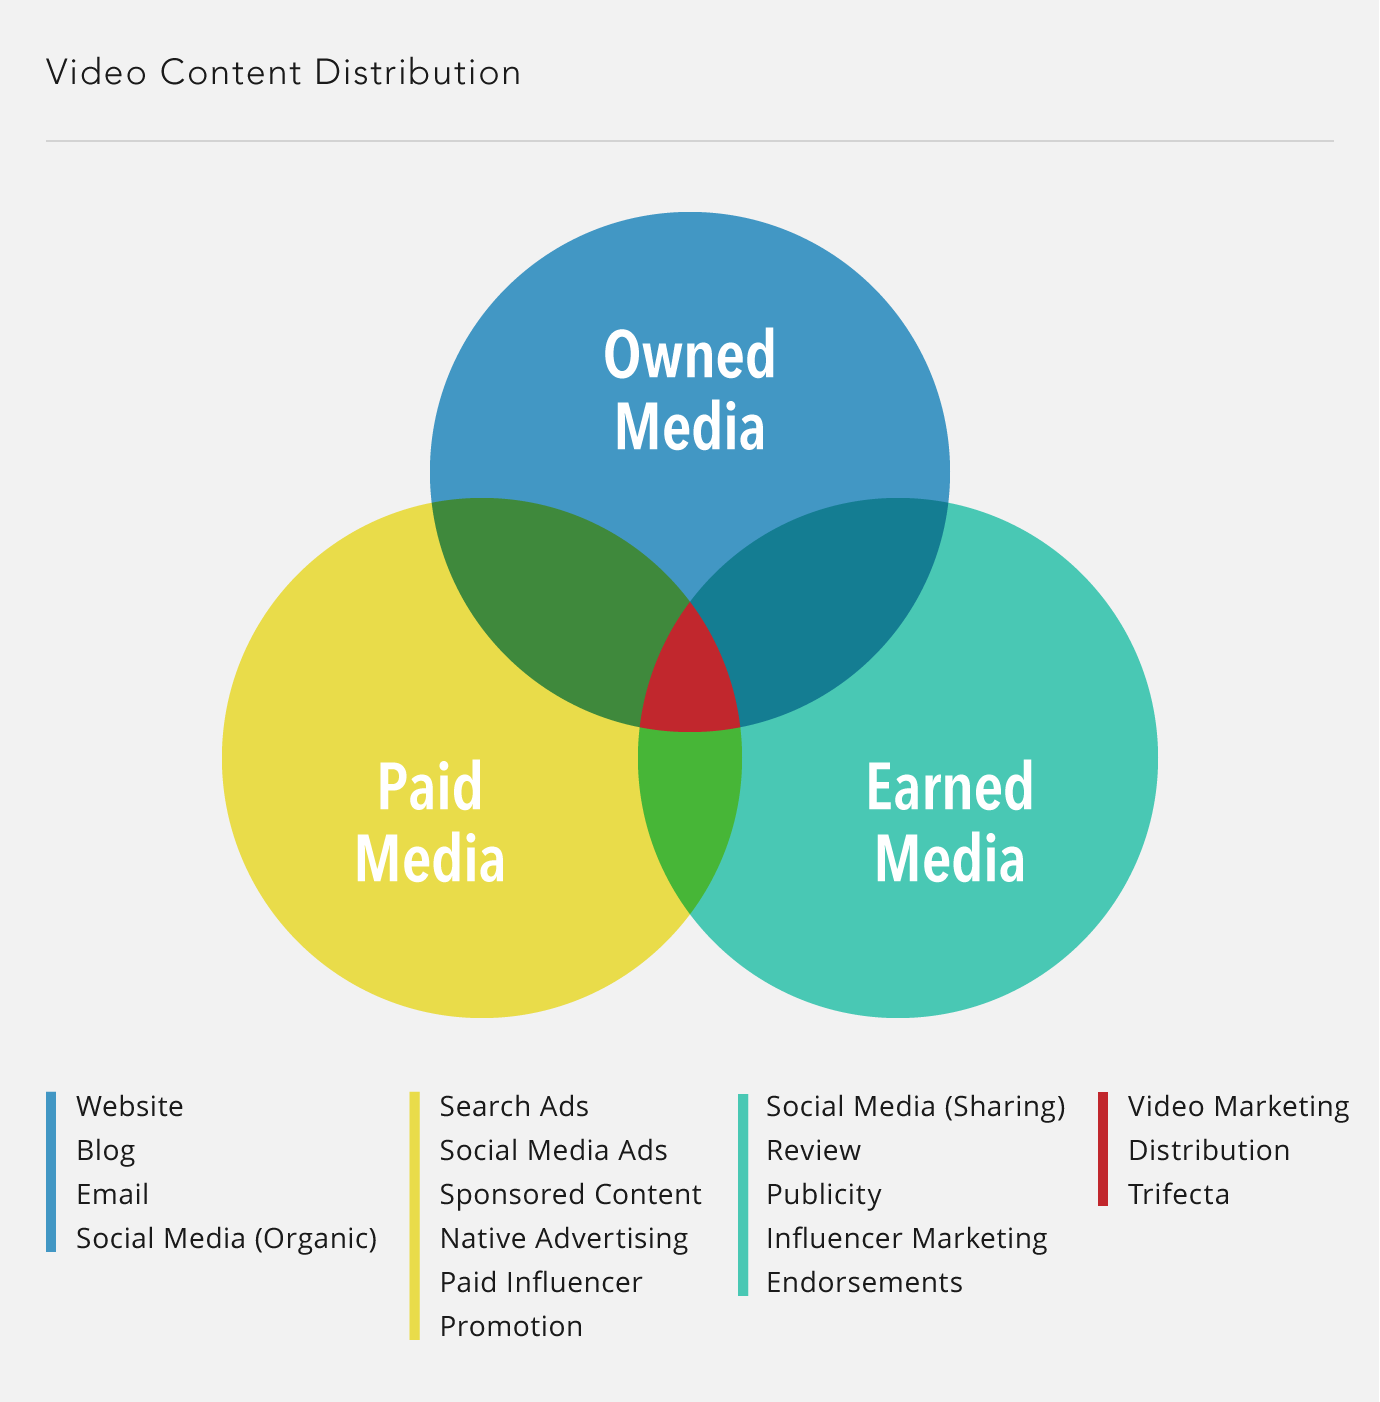 Video Content Distribution through the various channels